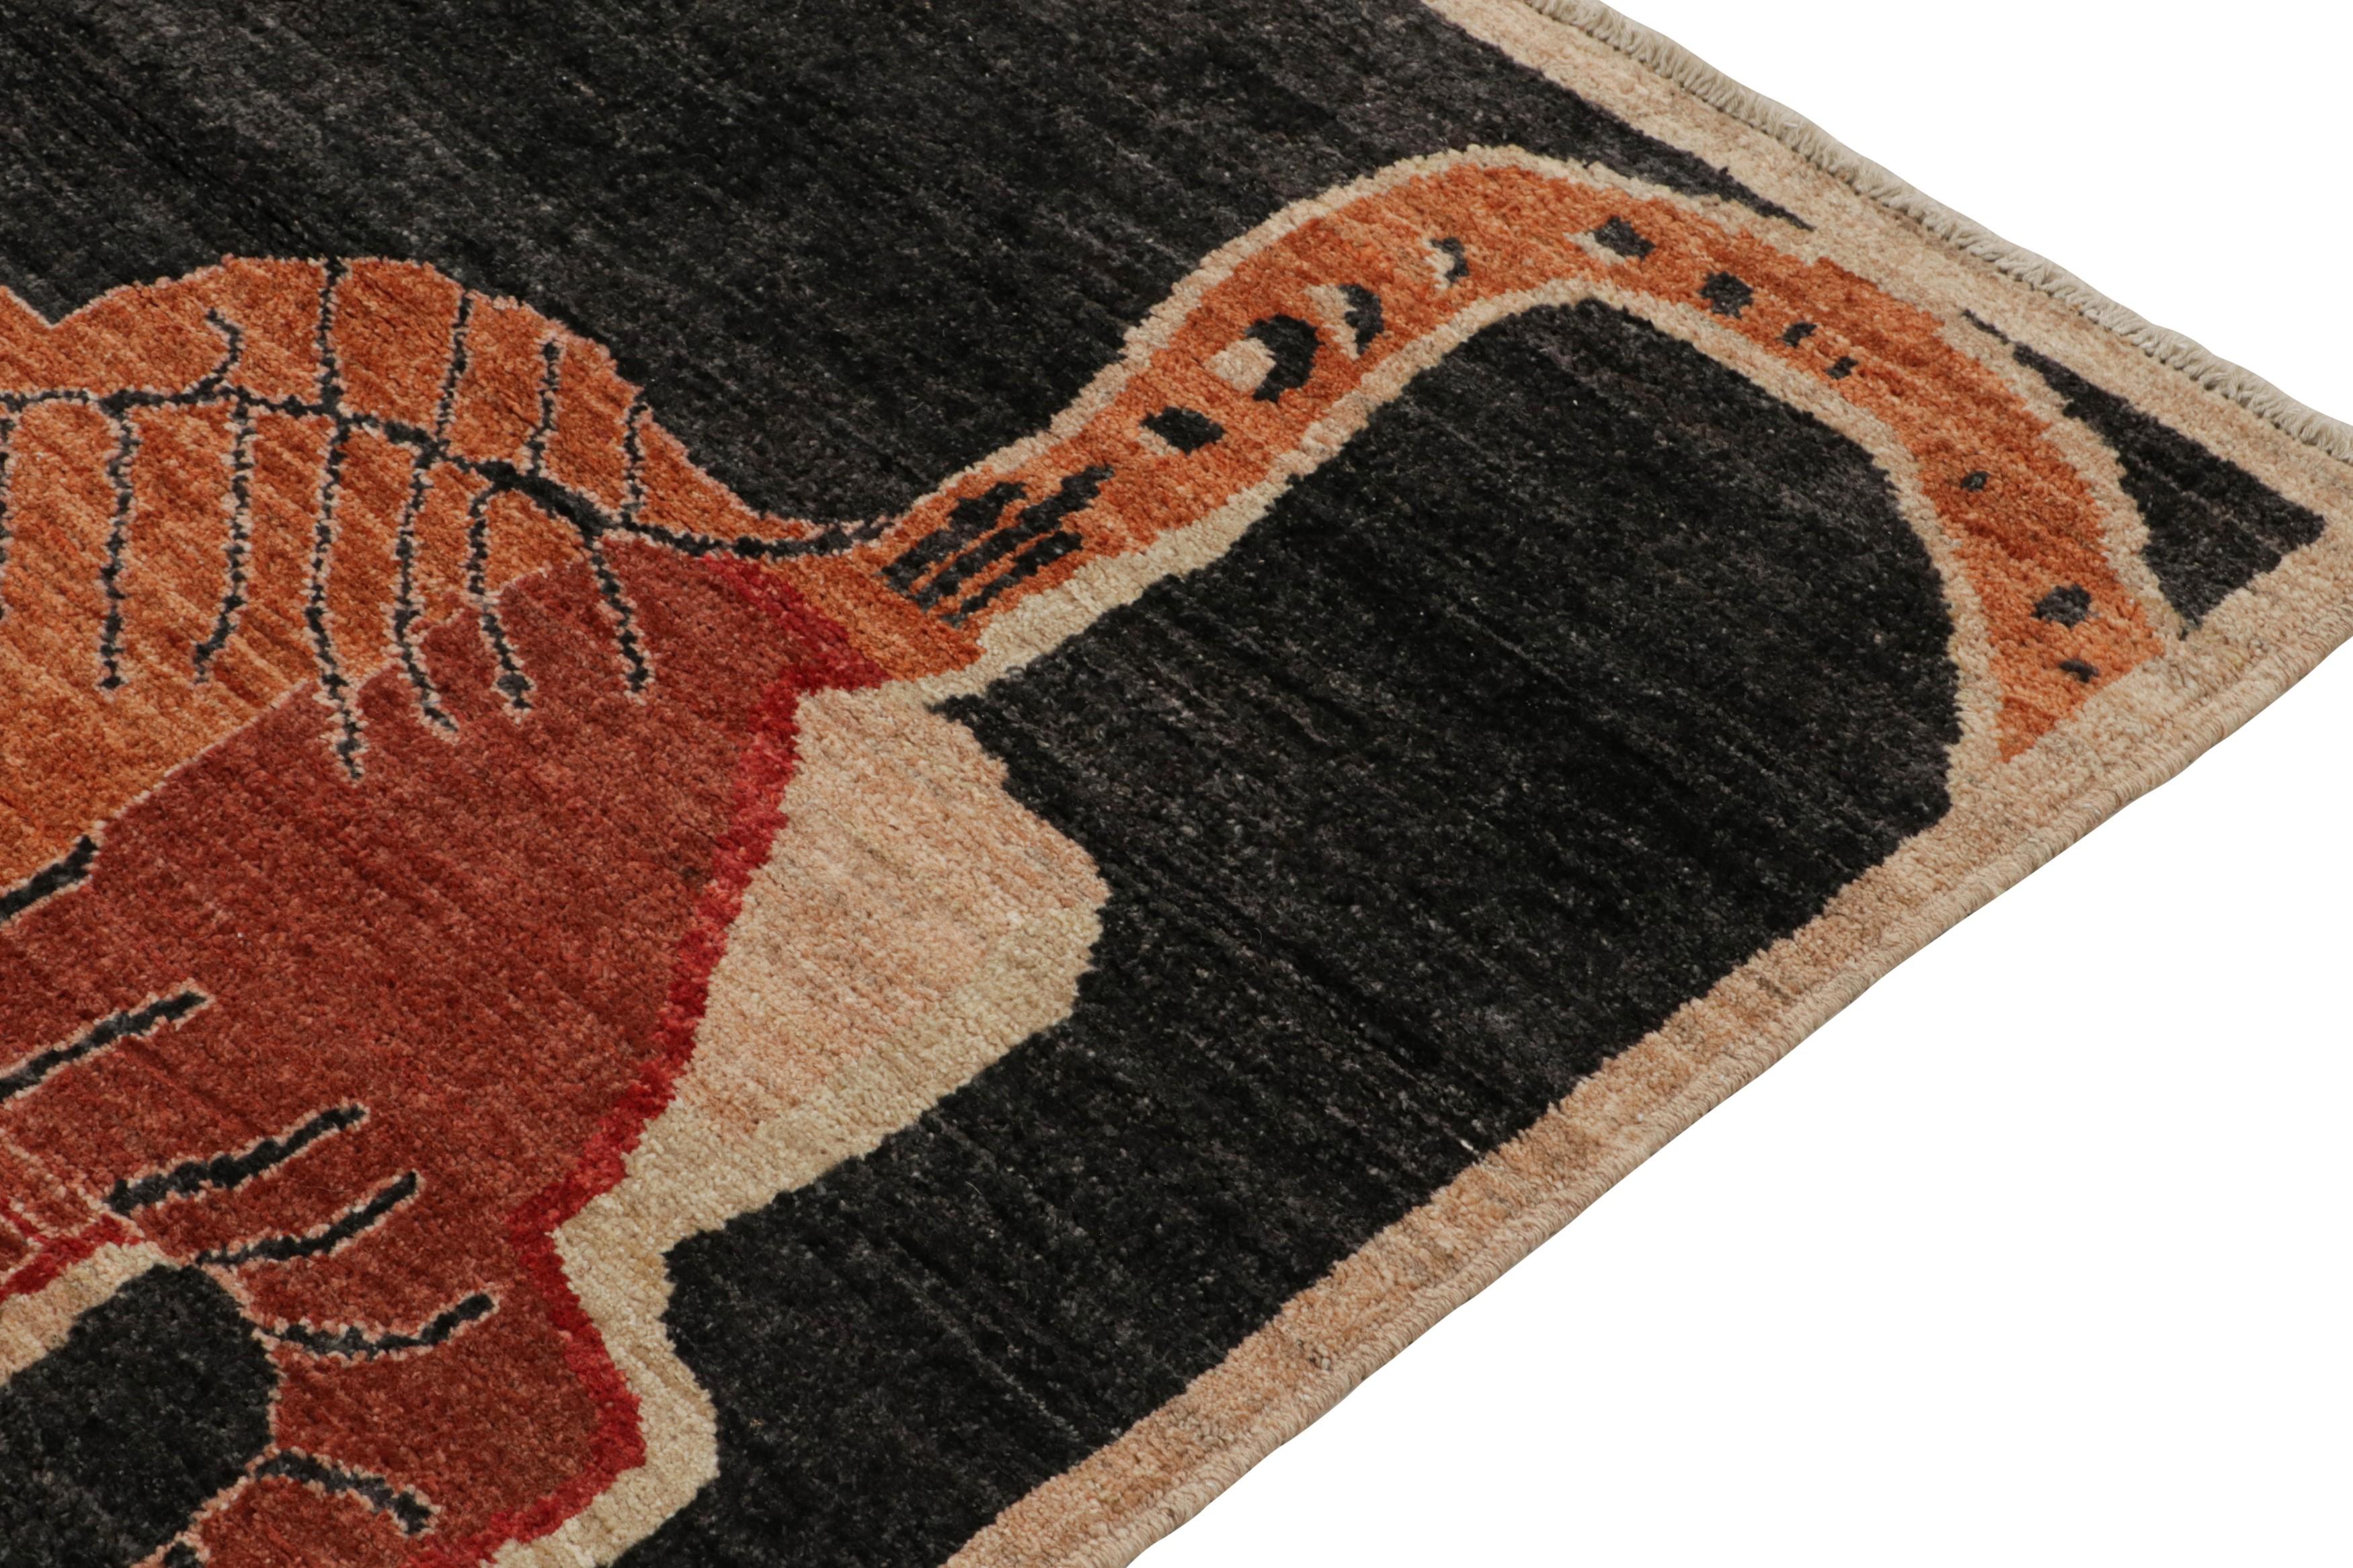 Rug & Kilim’s Tiger-Skin Rug in Black with Red-Orange Pictorial In New Condition For Sale In Long Island City, NY